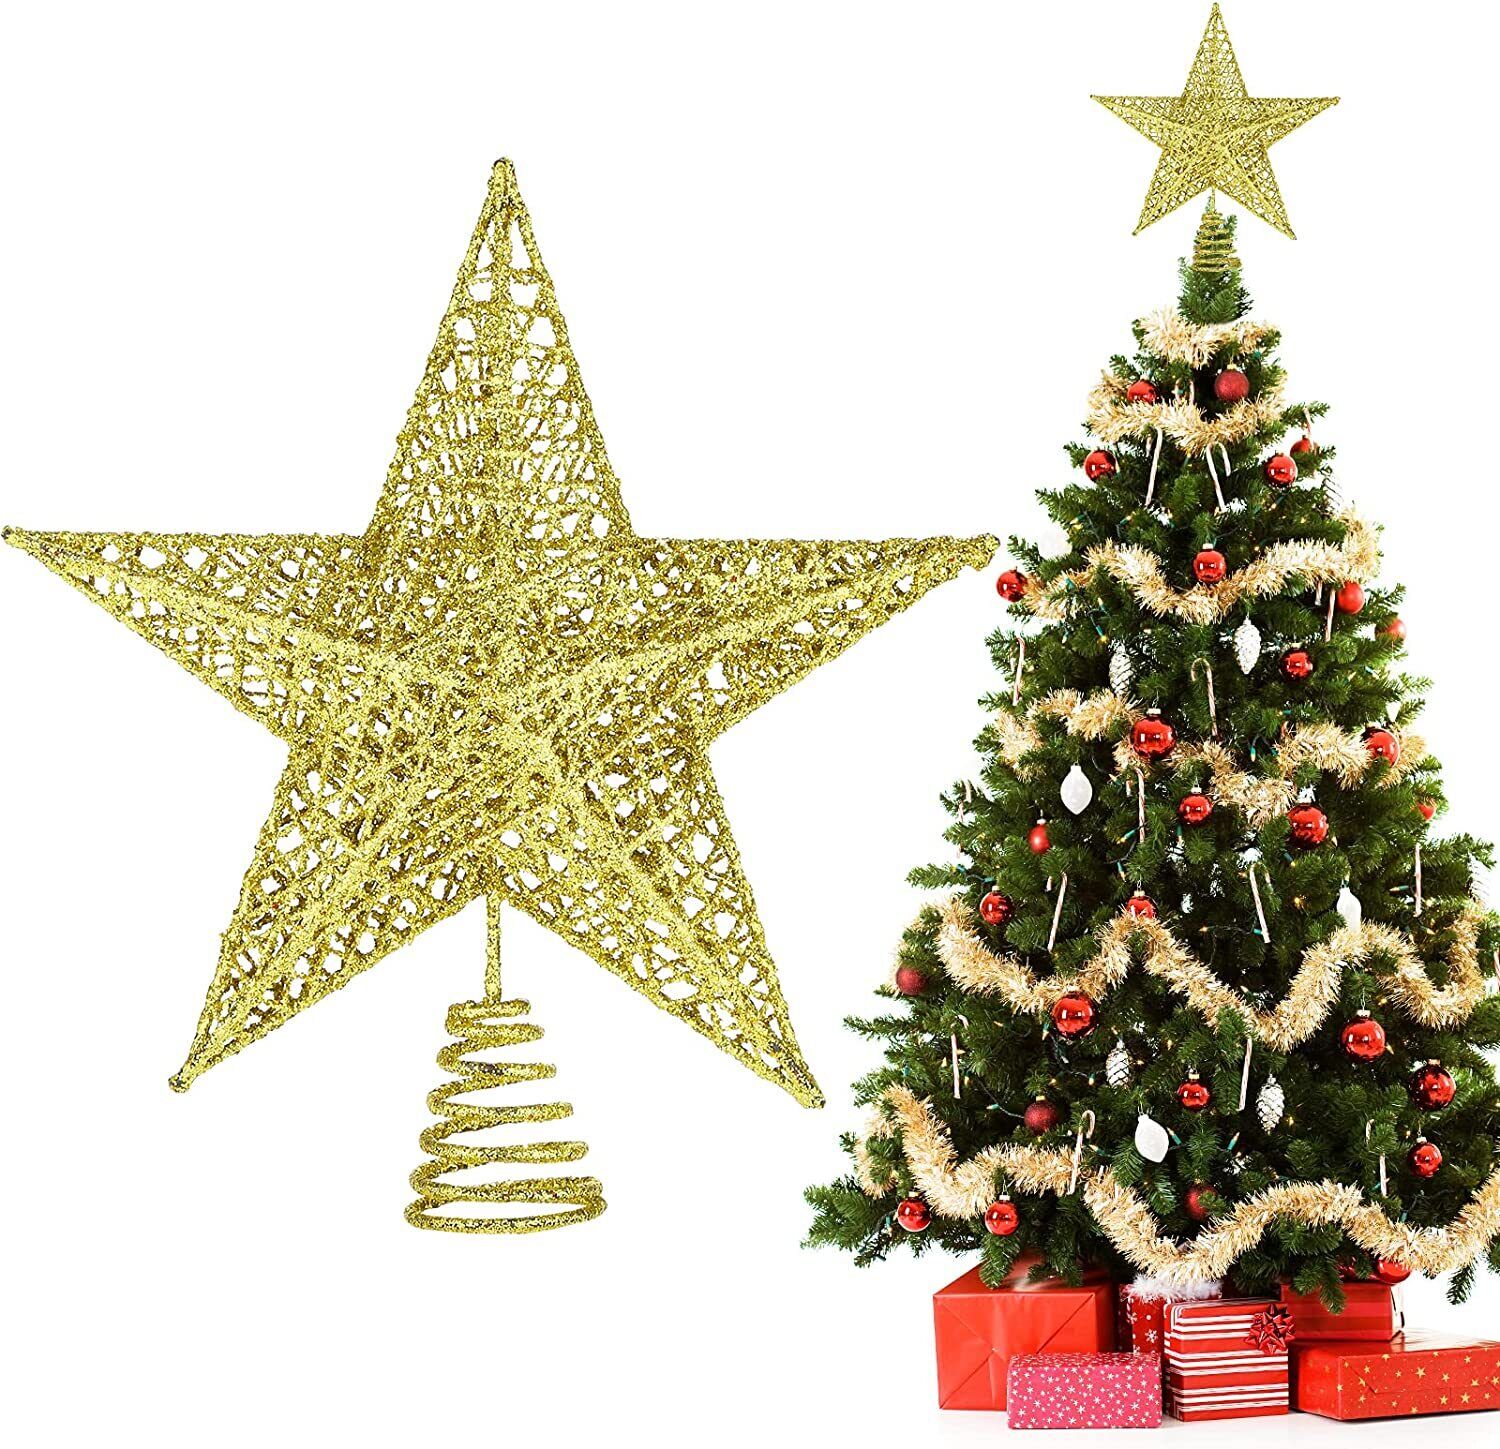 Christmas Tree Topper,9 Inch Christmas Star Tree Topper for Christmas Decoration